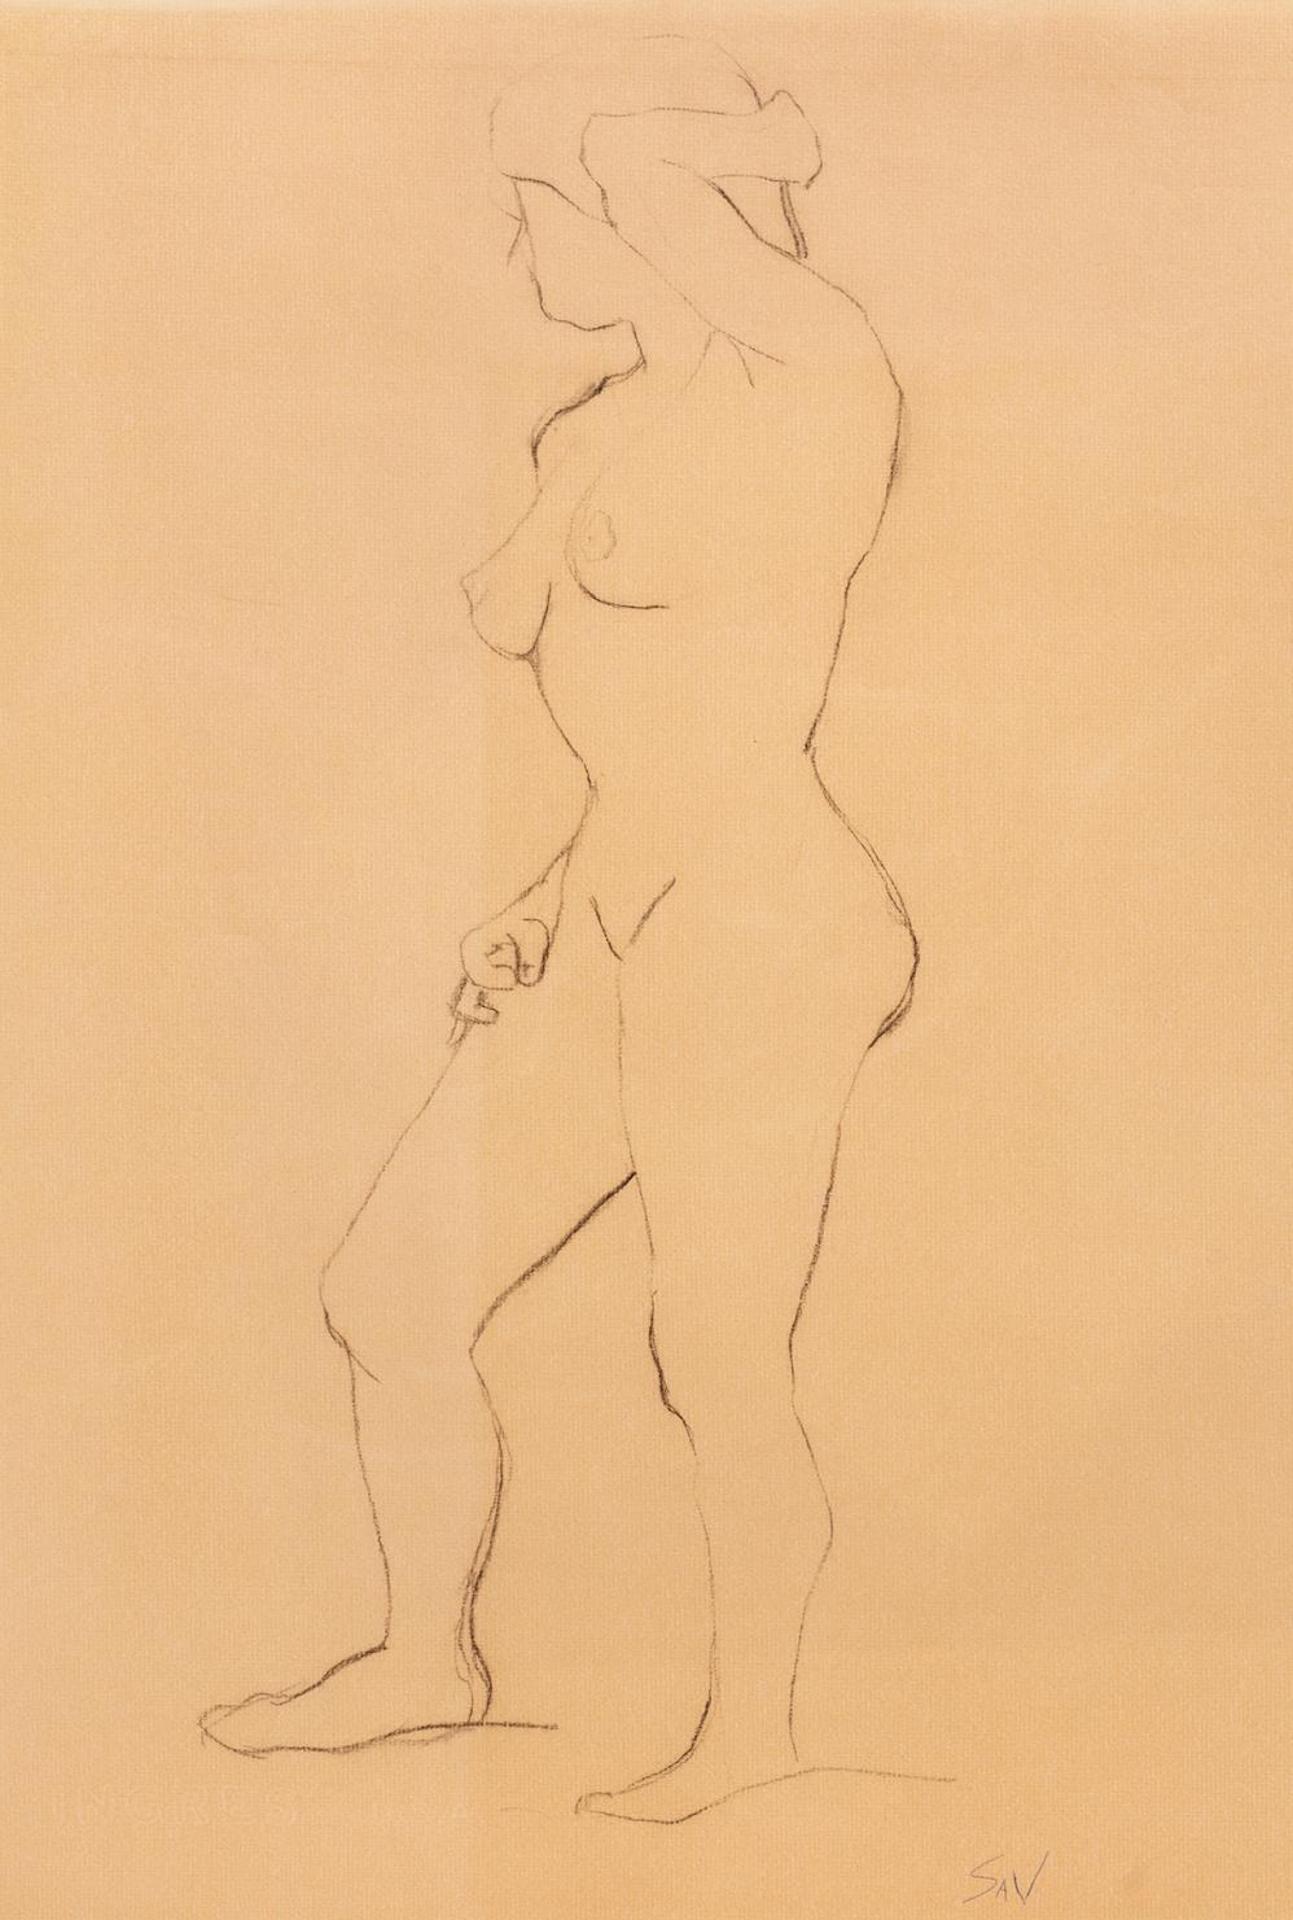 Gerald Savoie (1930) - Untitled - Study of a Female Model Side View